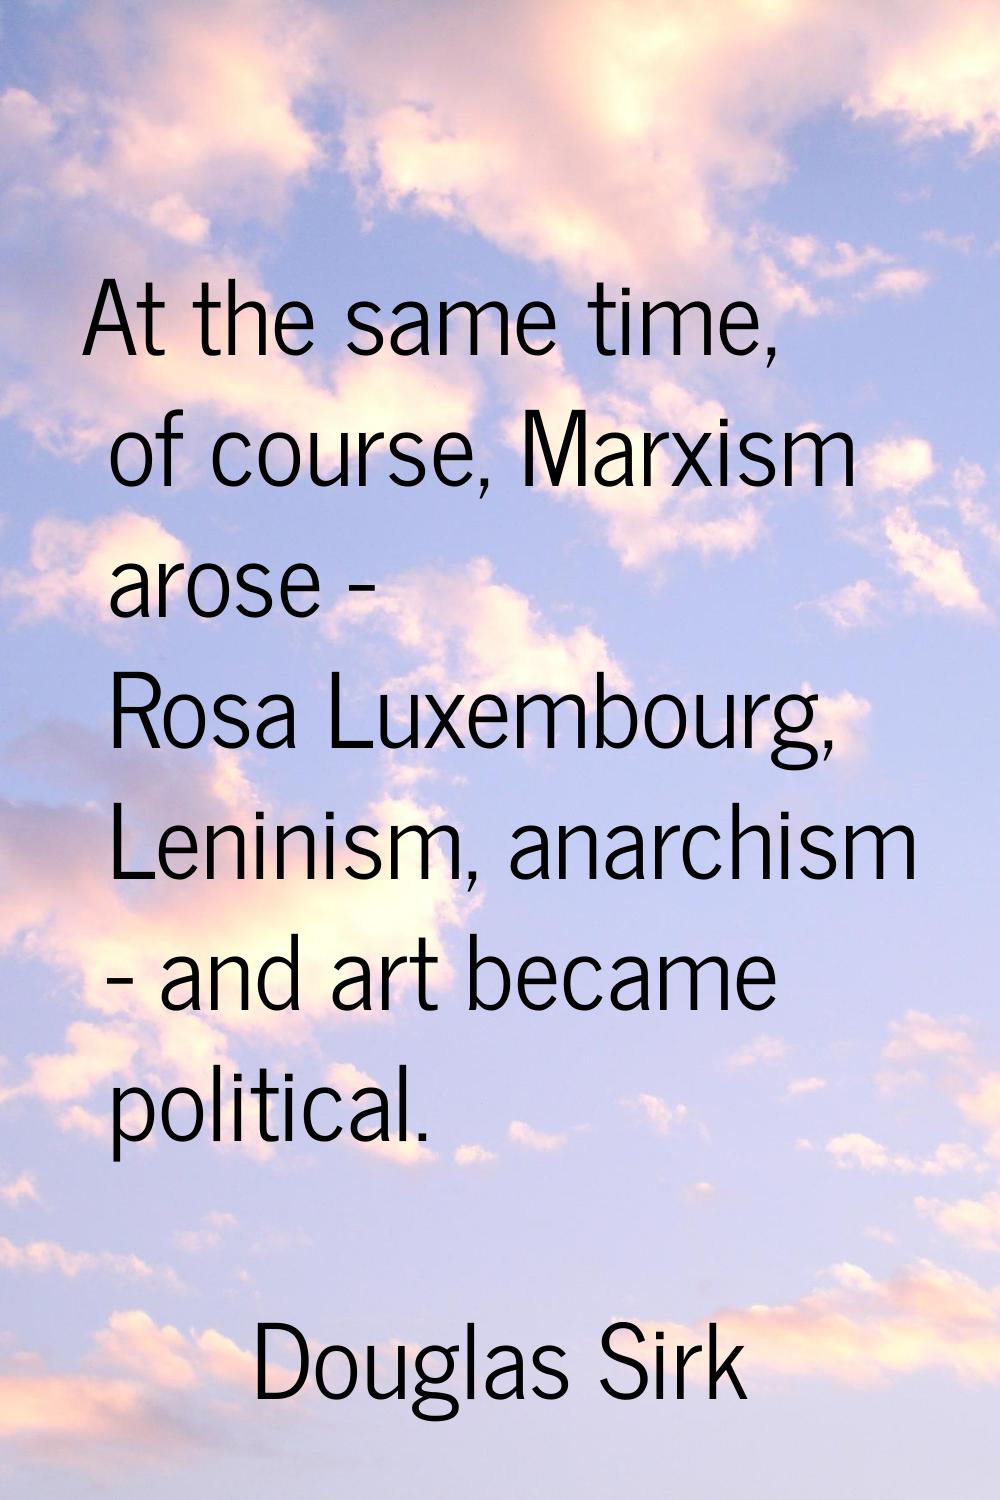 At the same time, of course, Marxism arose - Rosa Luxembourg, Leninism, anarchism - and art became 